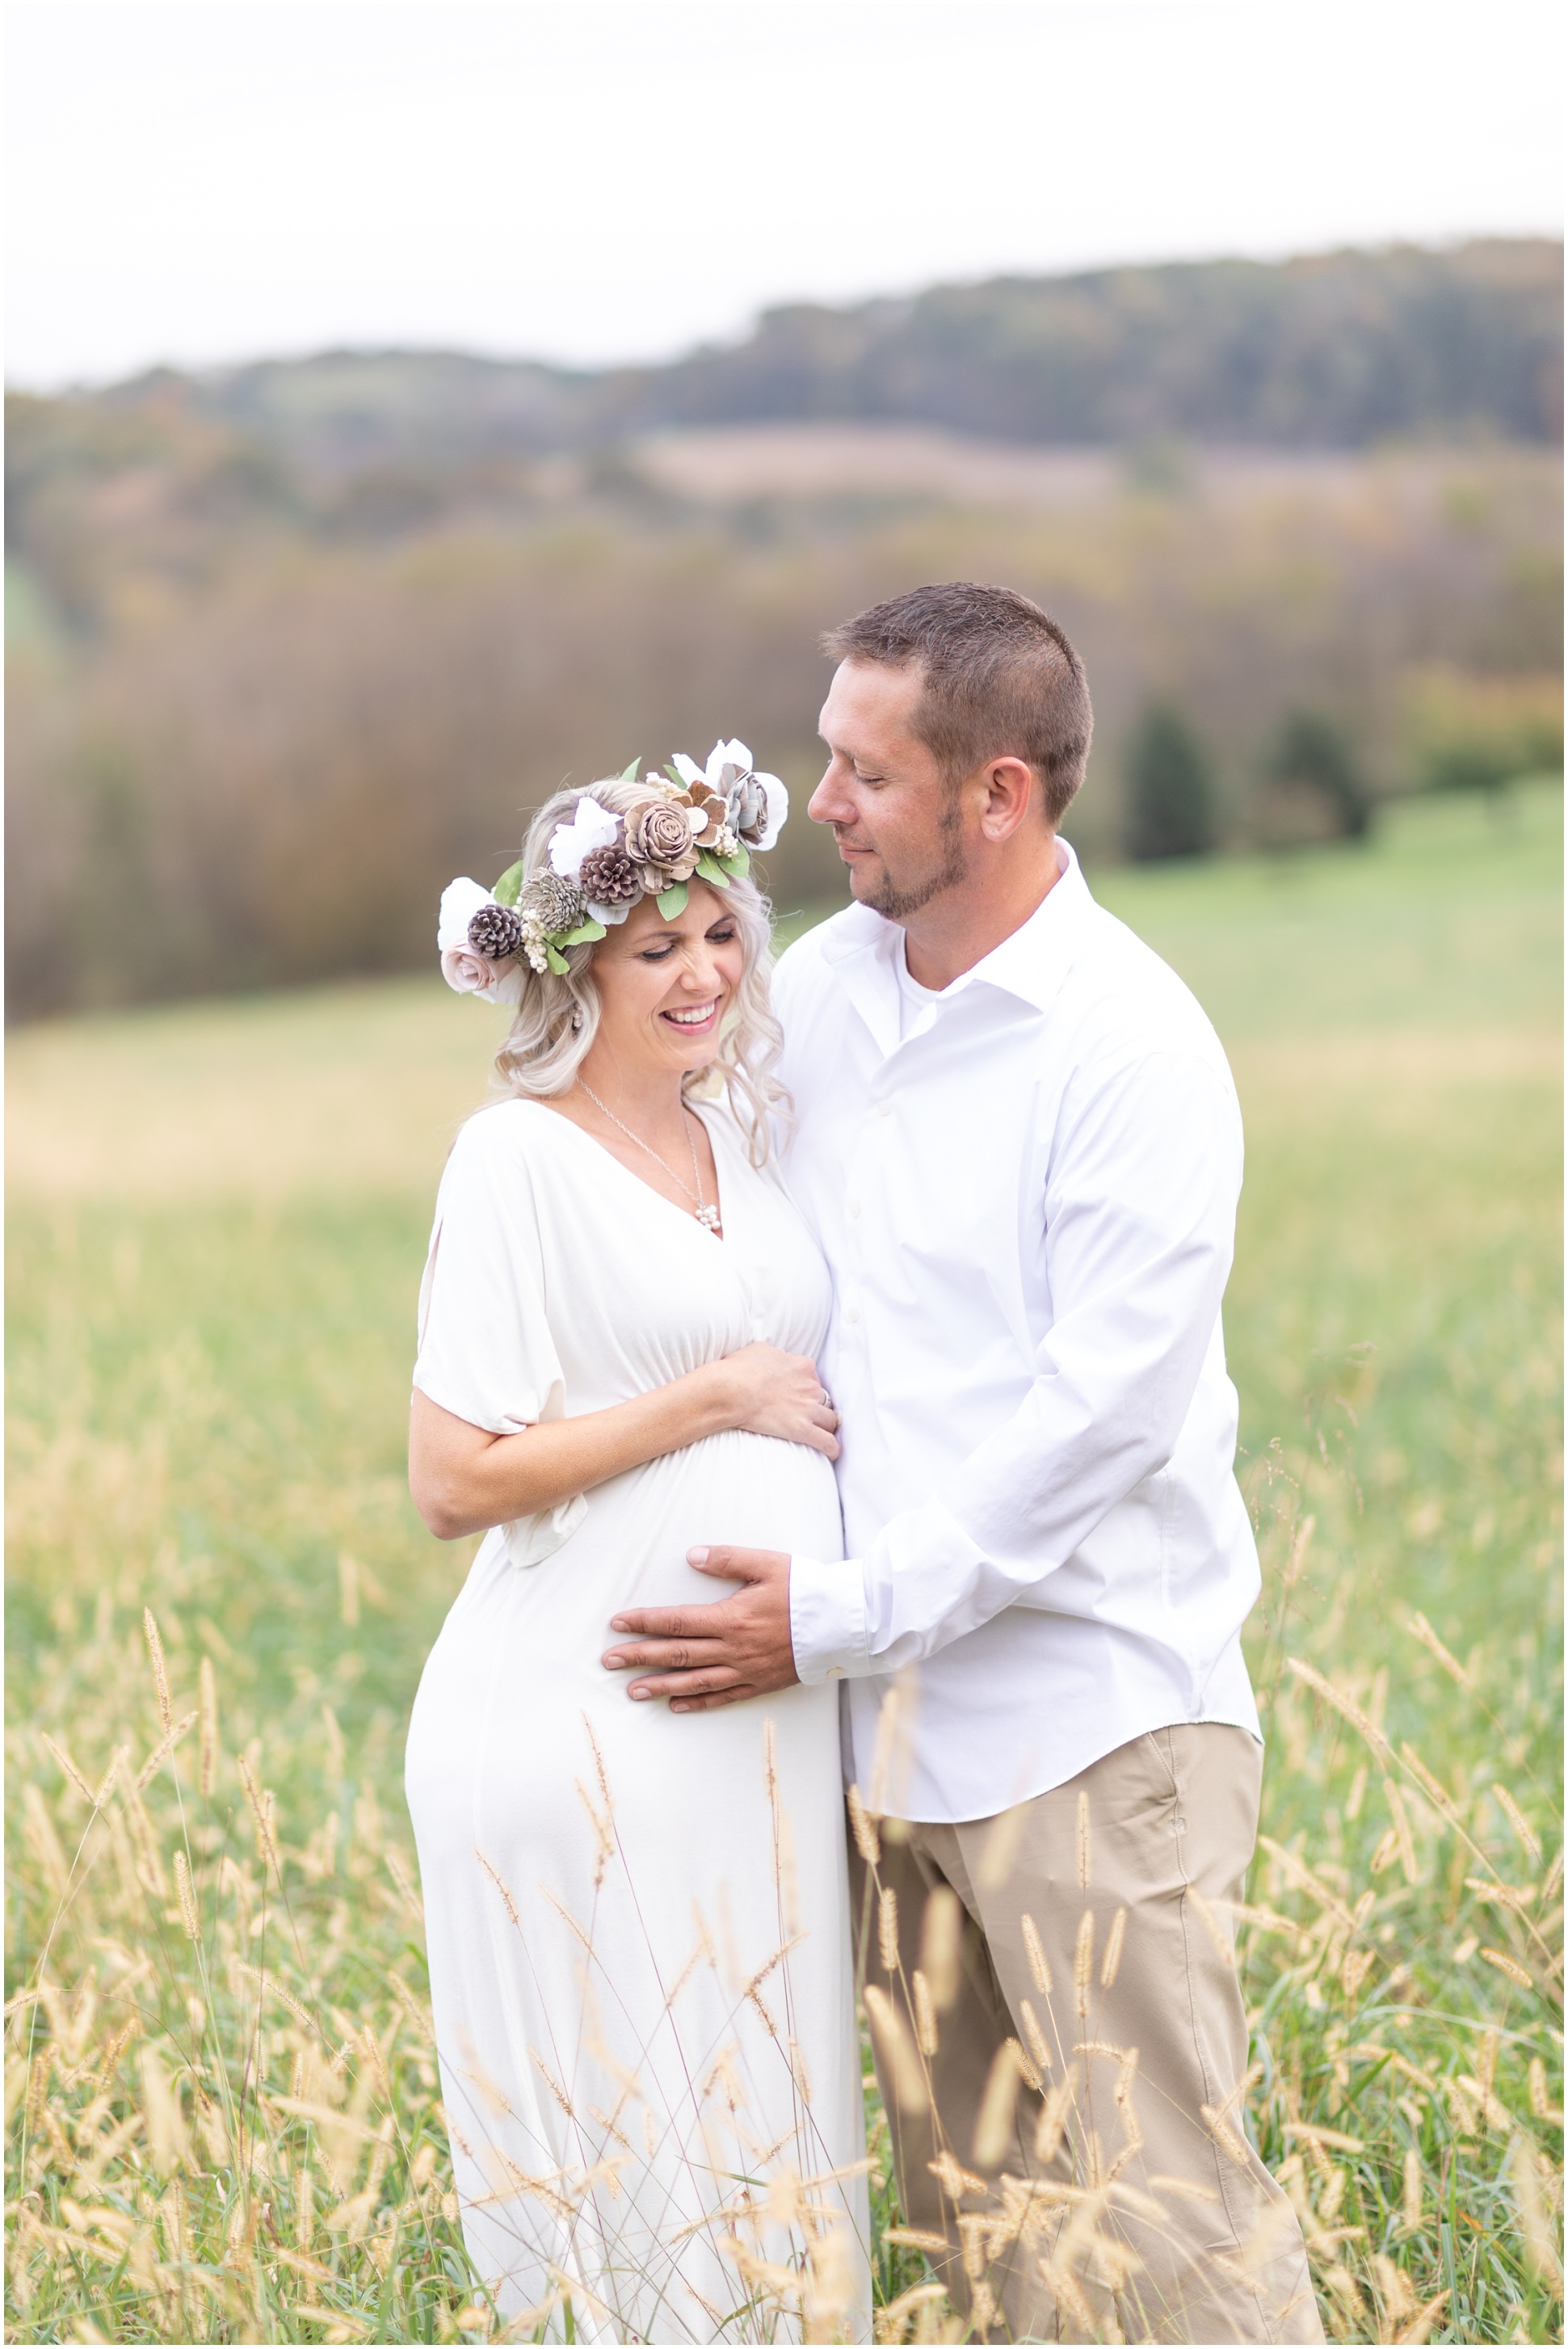 Rebecca and Scott in the field for their maternity session. Rebecca in a white dress with a fall flower crown.